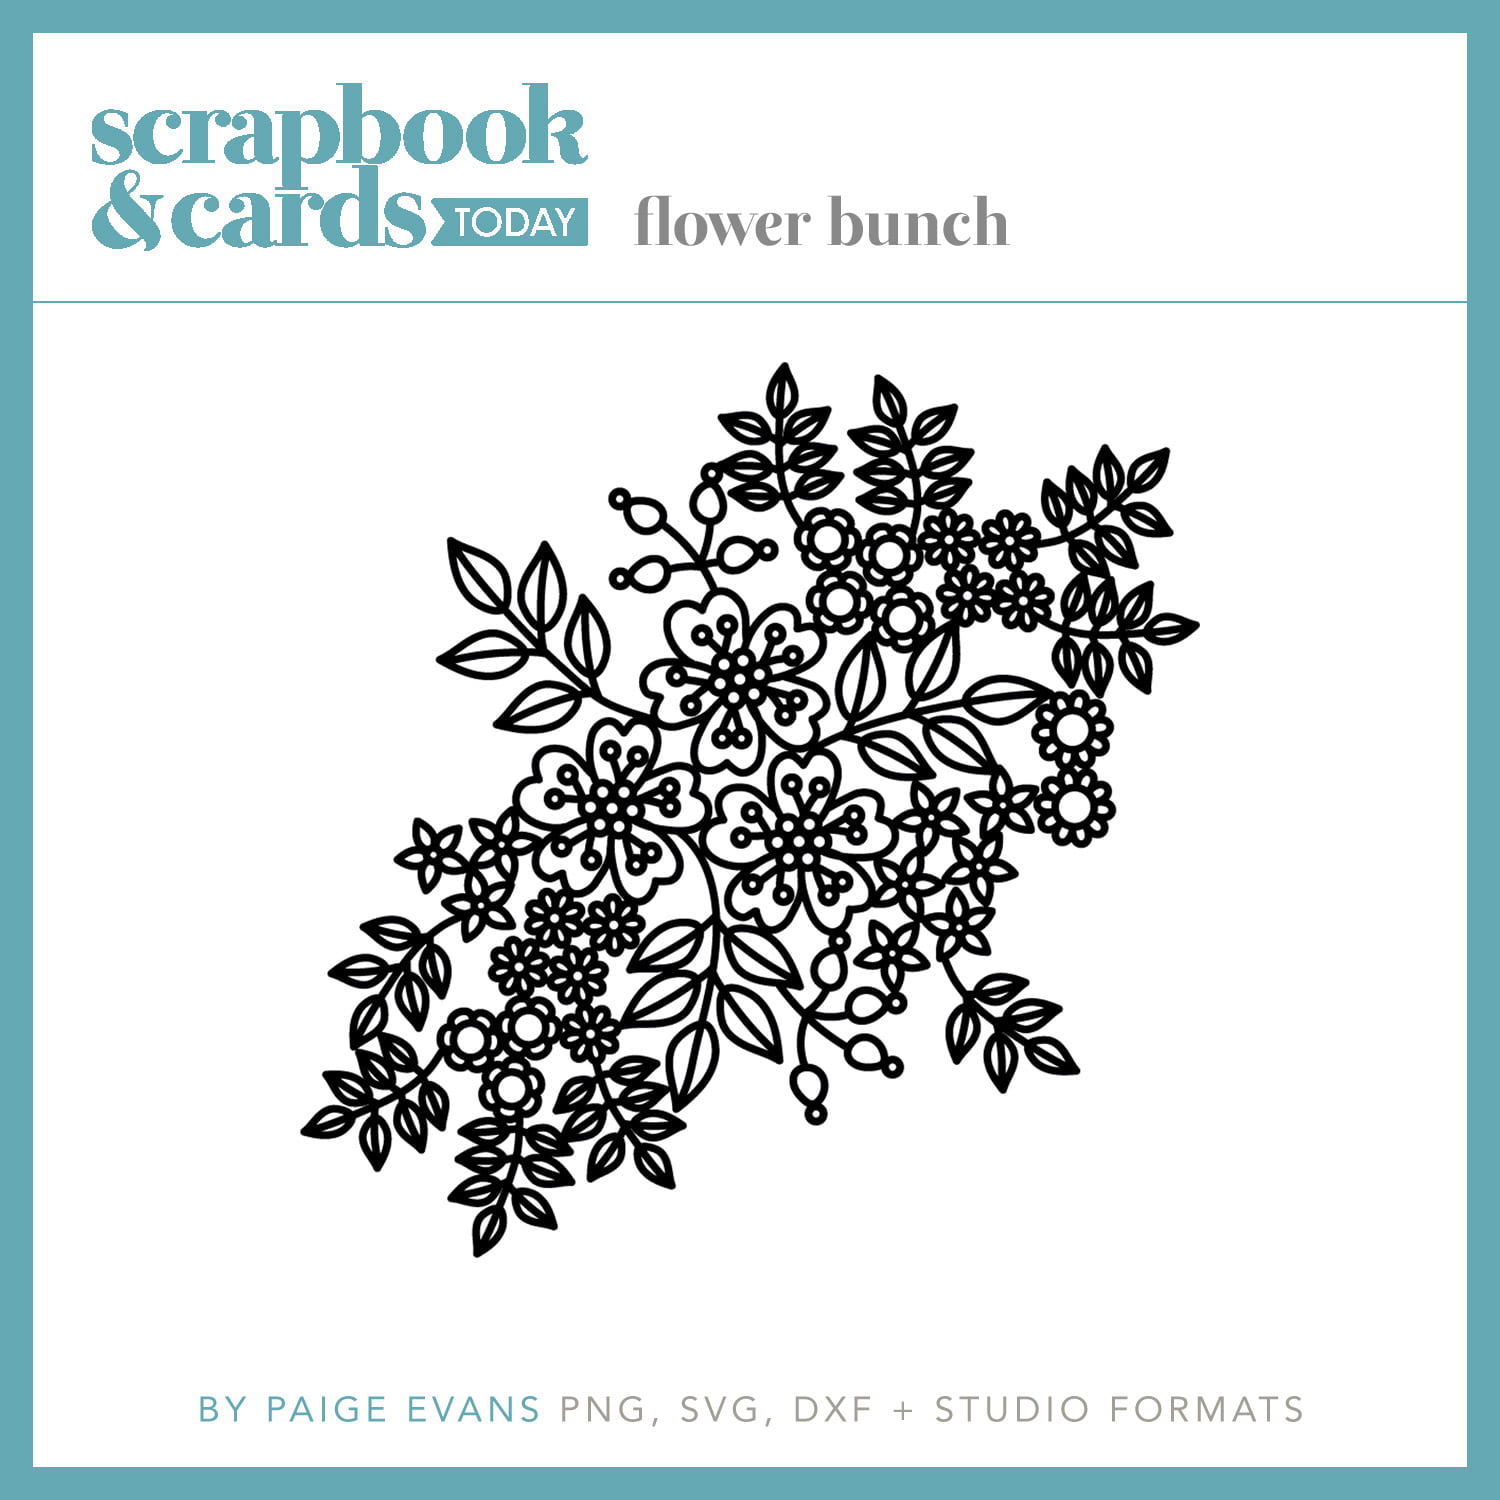 iNSD free cut file by Paige Evans for Scrapbook & Cards Today